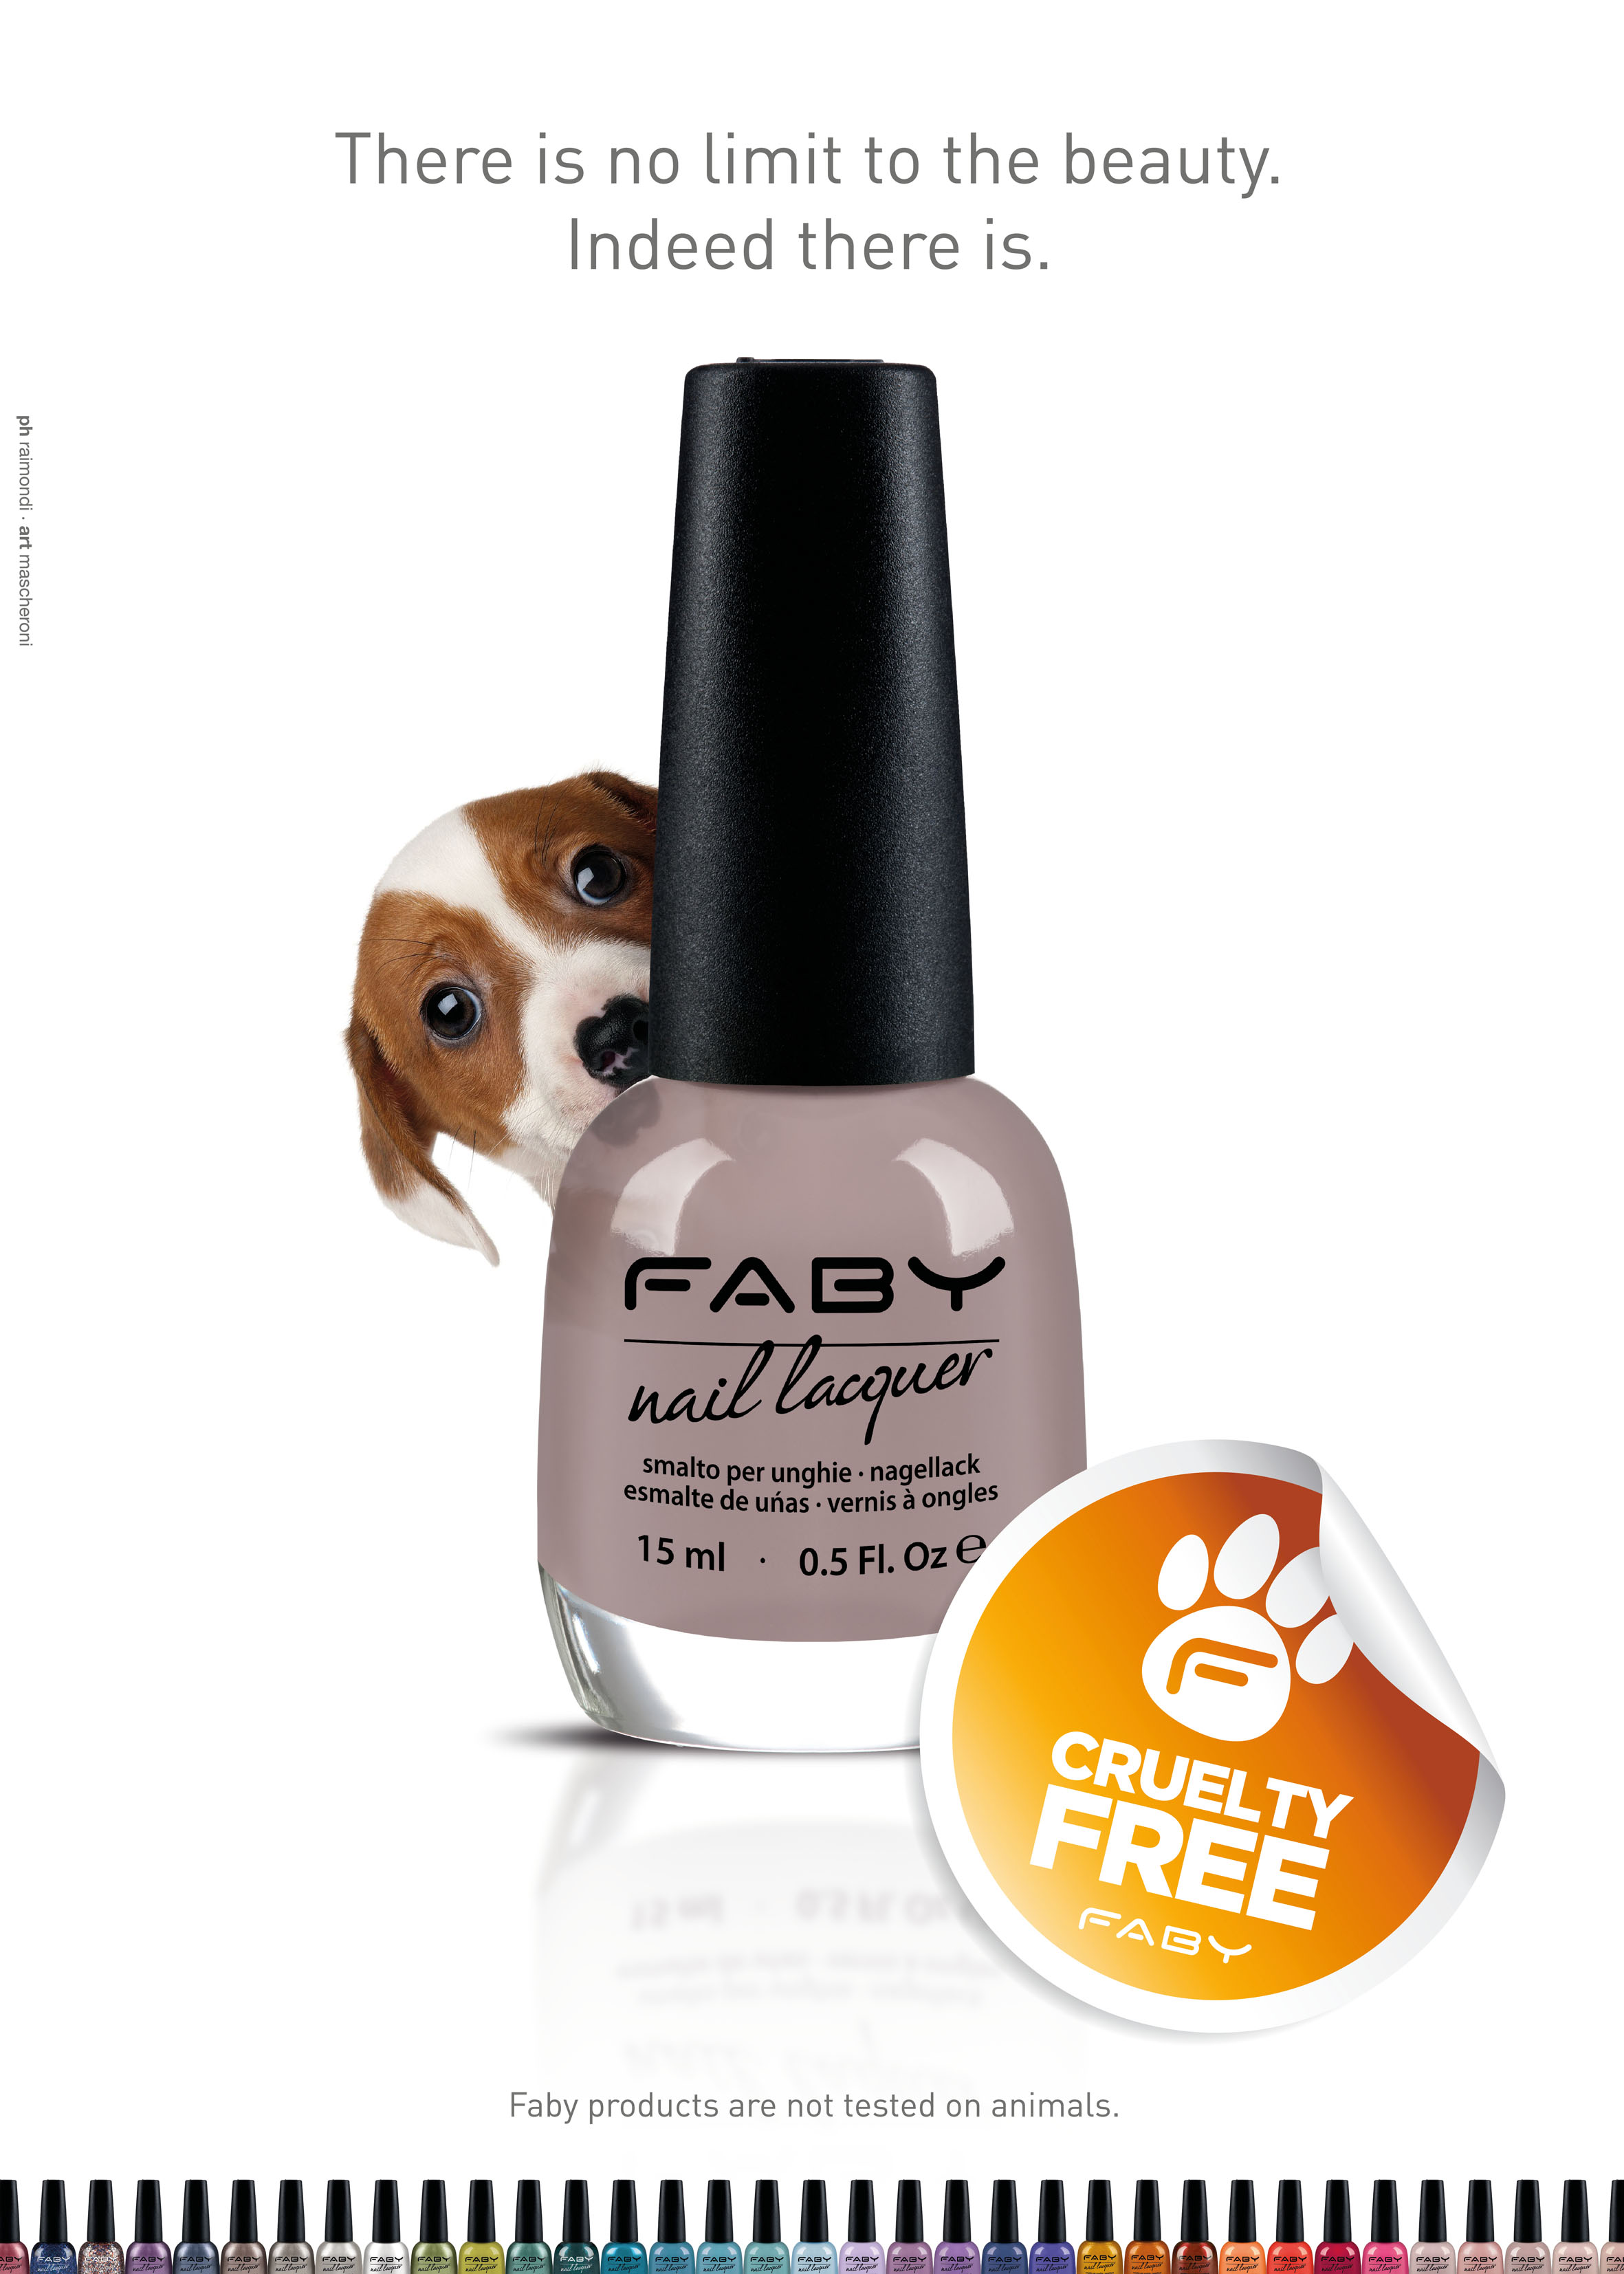 Faby Cruelty free eng dog1